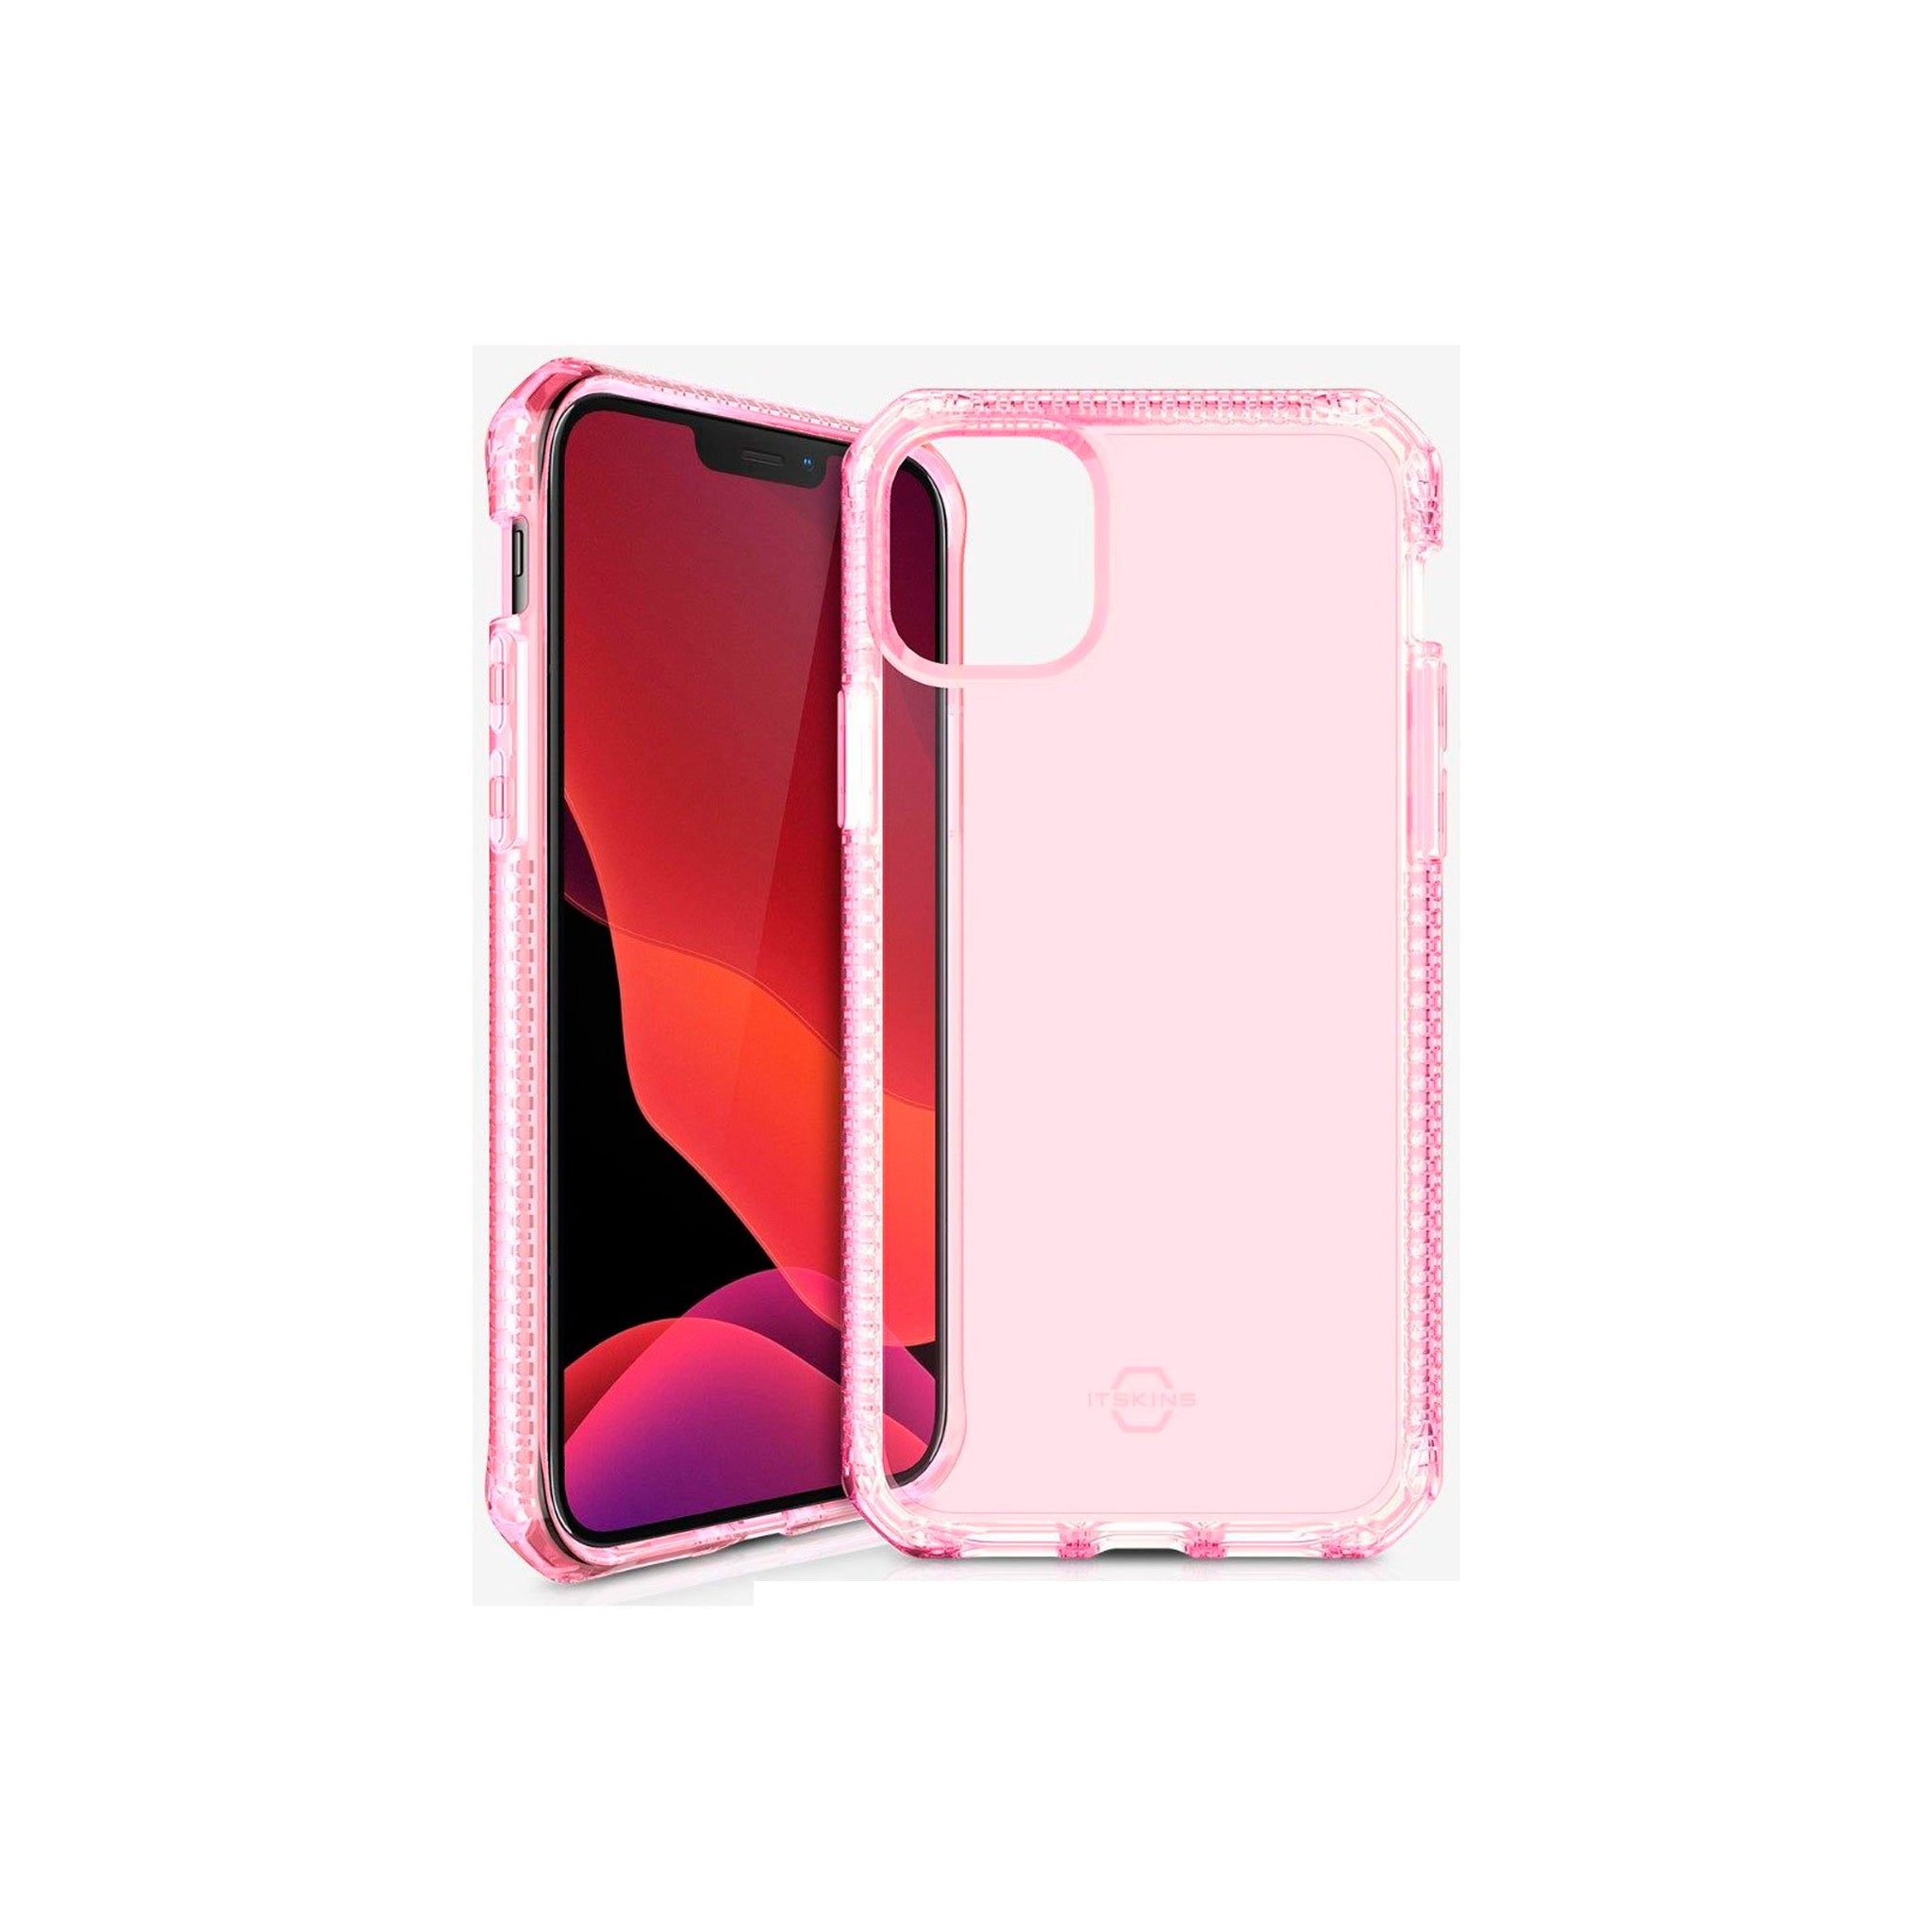 Itskins - Spectrum Clear Case For Apple Iphone 12 Pro Max - Light Pink